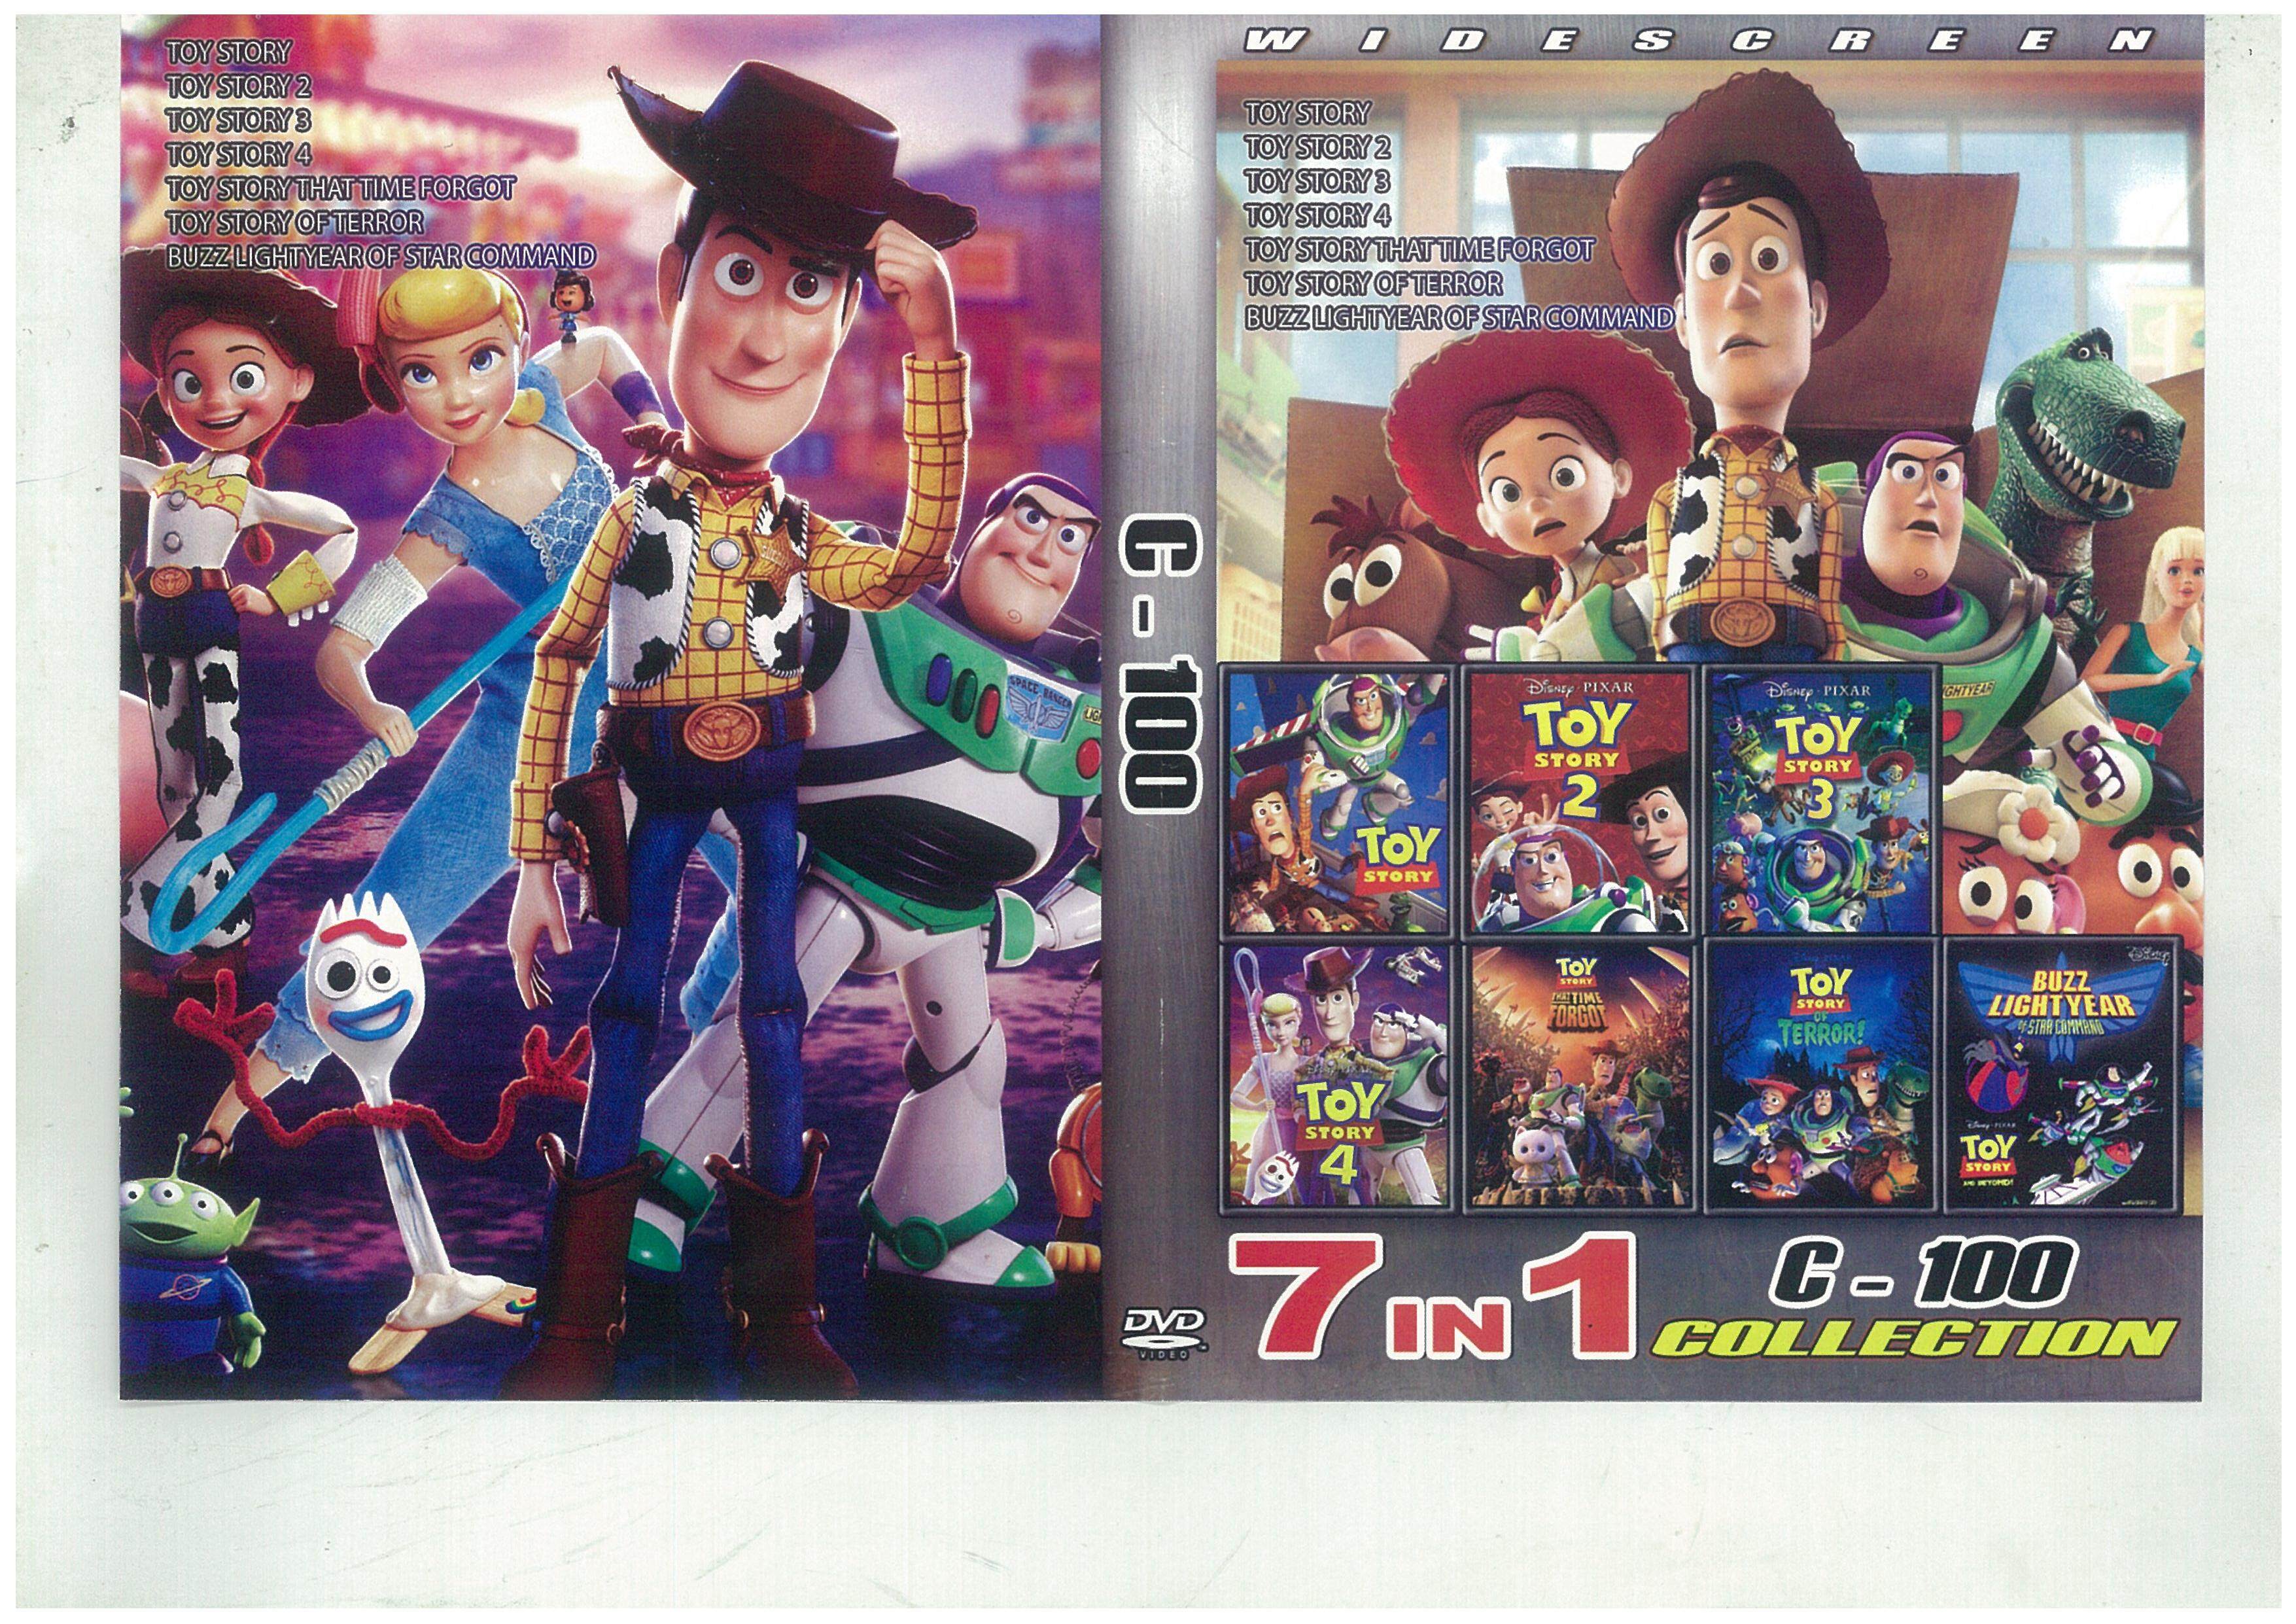 DVD English Cartoon Toy Story 7 In 1 Collection C 100 - Movieland682786 |  Lazada